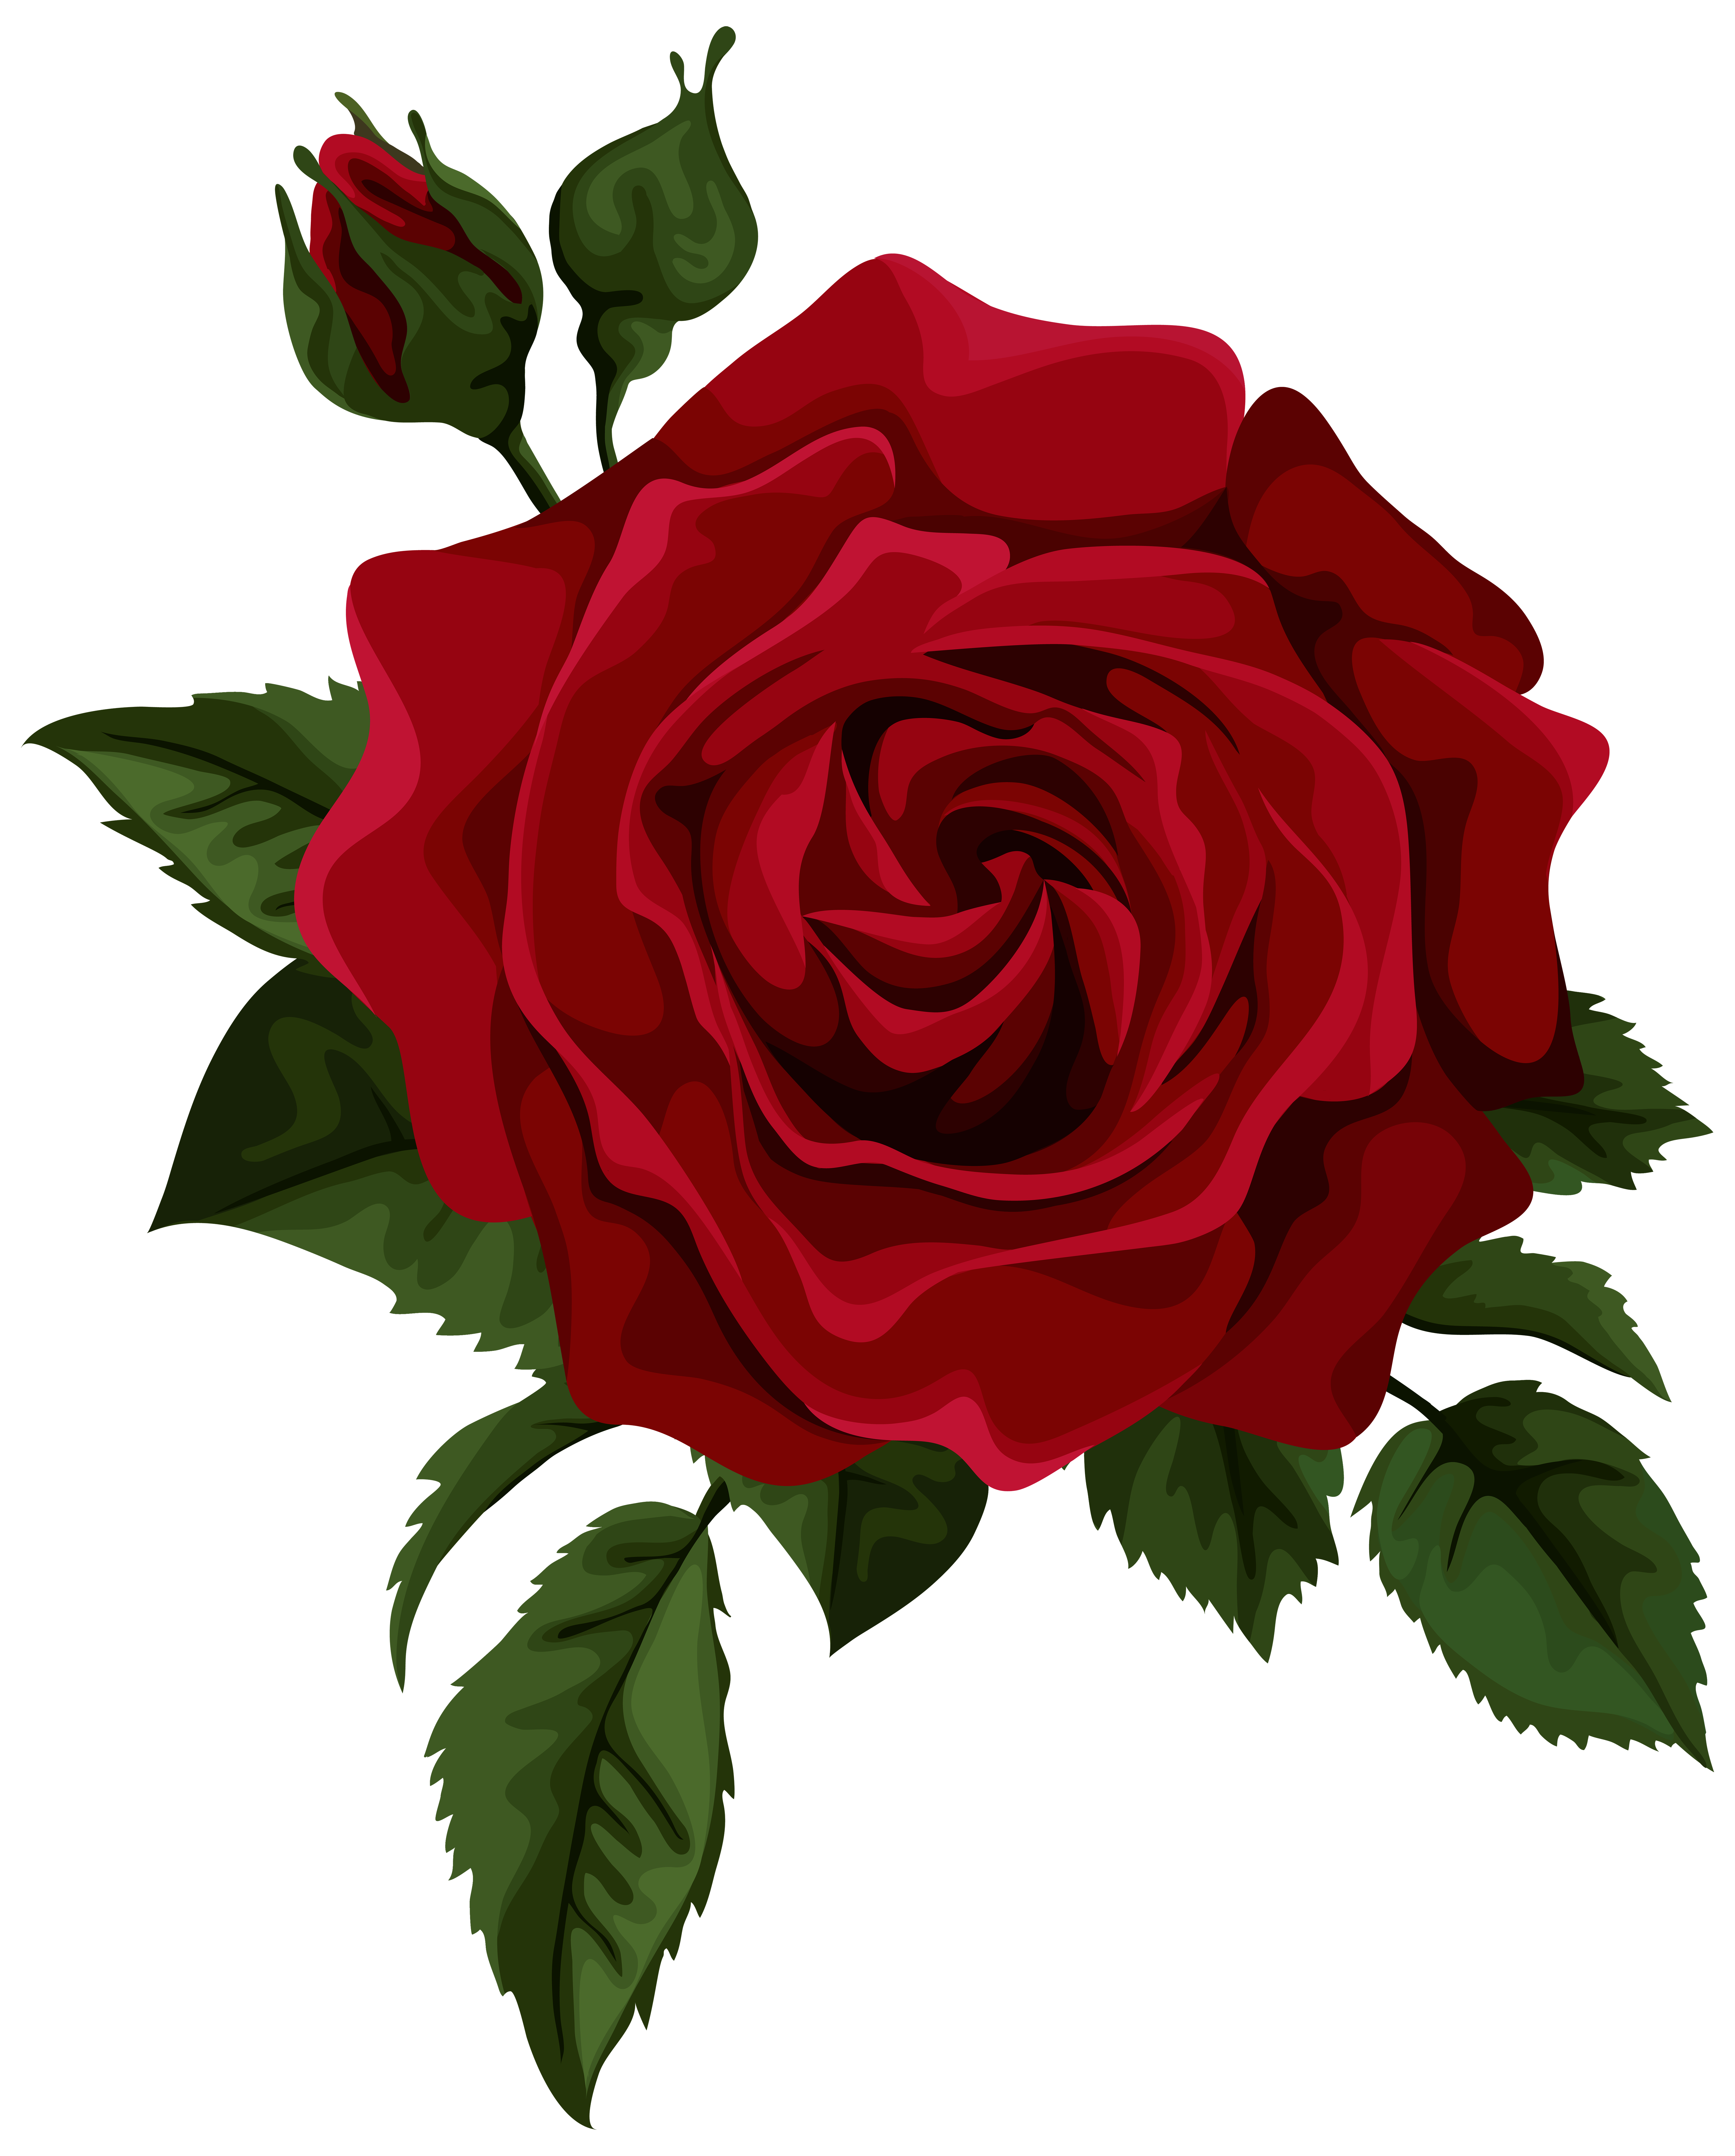 Red Rose with Bud Transparent PNG Clip Art Picture | Gallery ...